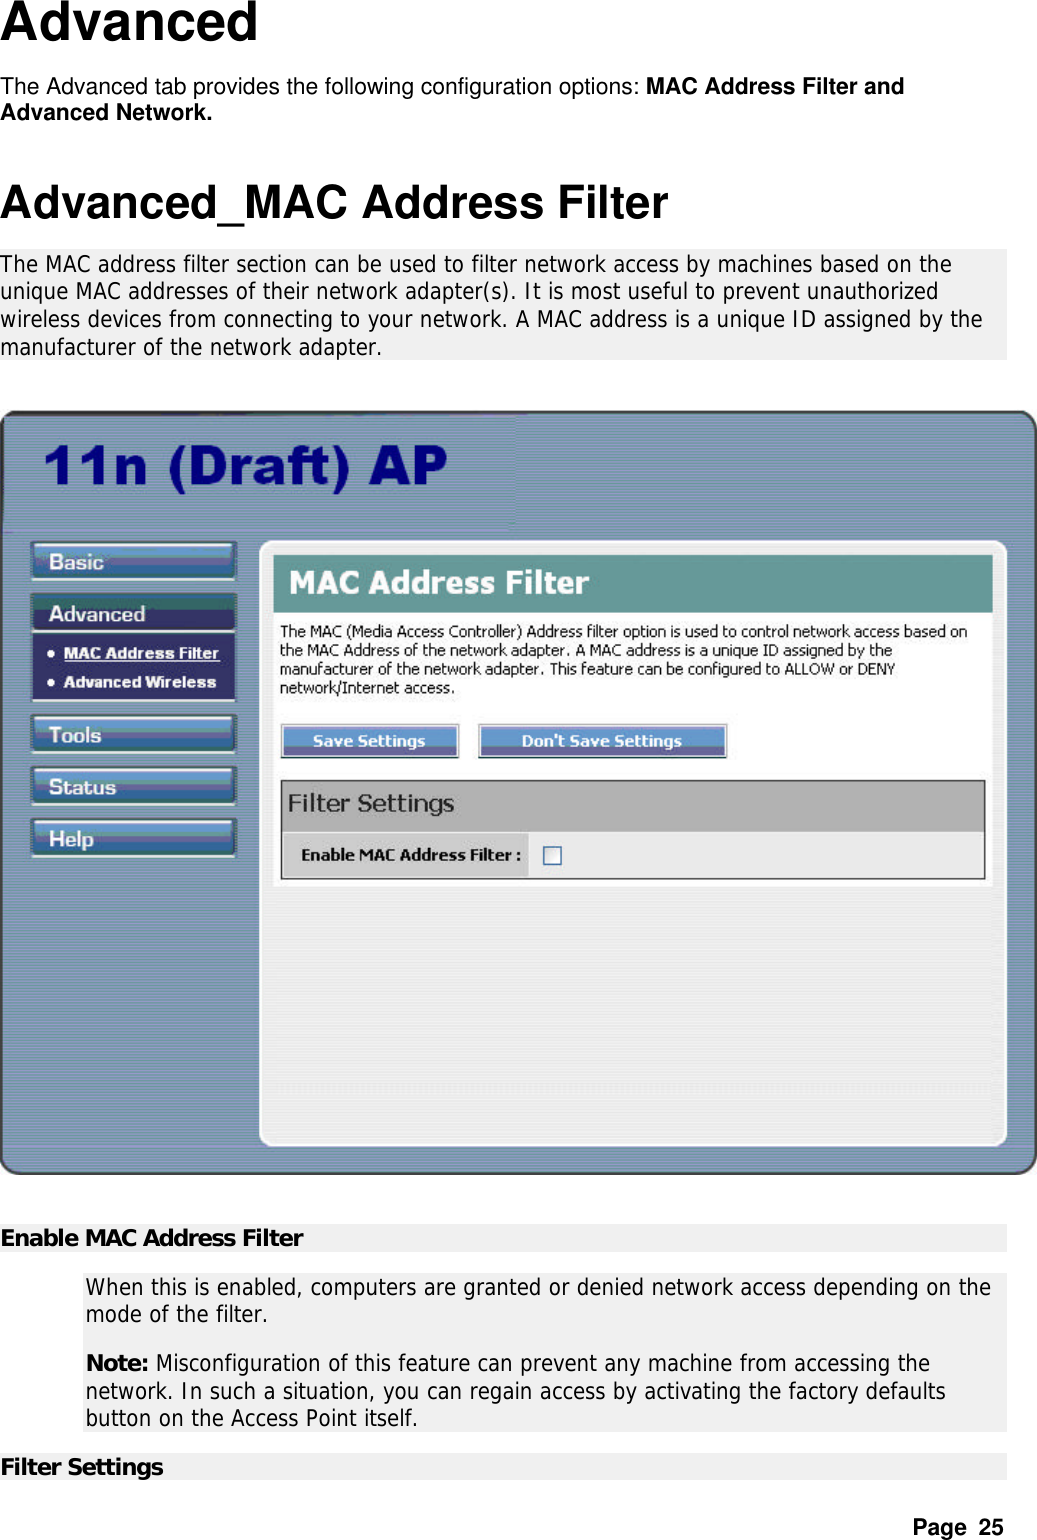 Page  25 Advanced The Advanced tab provides the following configuration options: MAC Address Filter and Advanced Network.    Advanced_MAC Address Filter The MAC address filter section can be used to filter network access by machines based on the unique MAC addresses of their network adapter(s). It is most useful to prevent unauthorized wireless devices from connecting to your network. A MAC address is a unique ID assigned by the manufacturer of the network adapter.     Enable MAC Address Filter   When this is enabled, computers are granted or denied network access depending on the mode of the filter.  Note: Misconfiguration of this feature can prevent any machine from accessing the network. In such a situation, you can regain access by activating the factory defaults button on the Access Point itself.  Filter Settings   